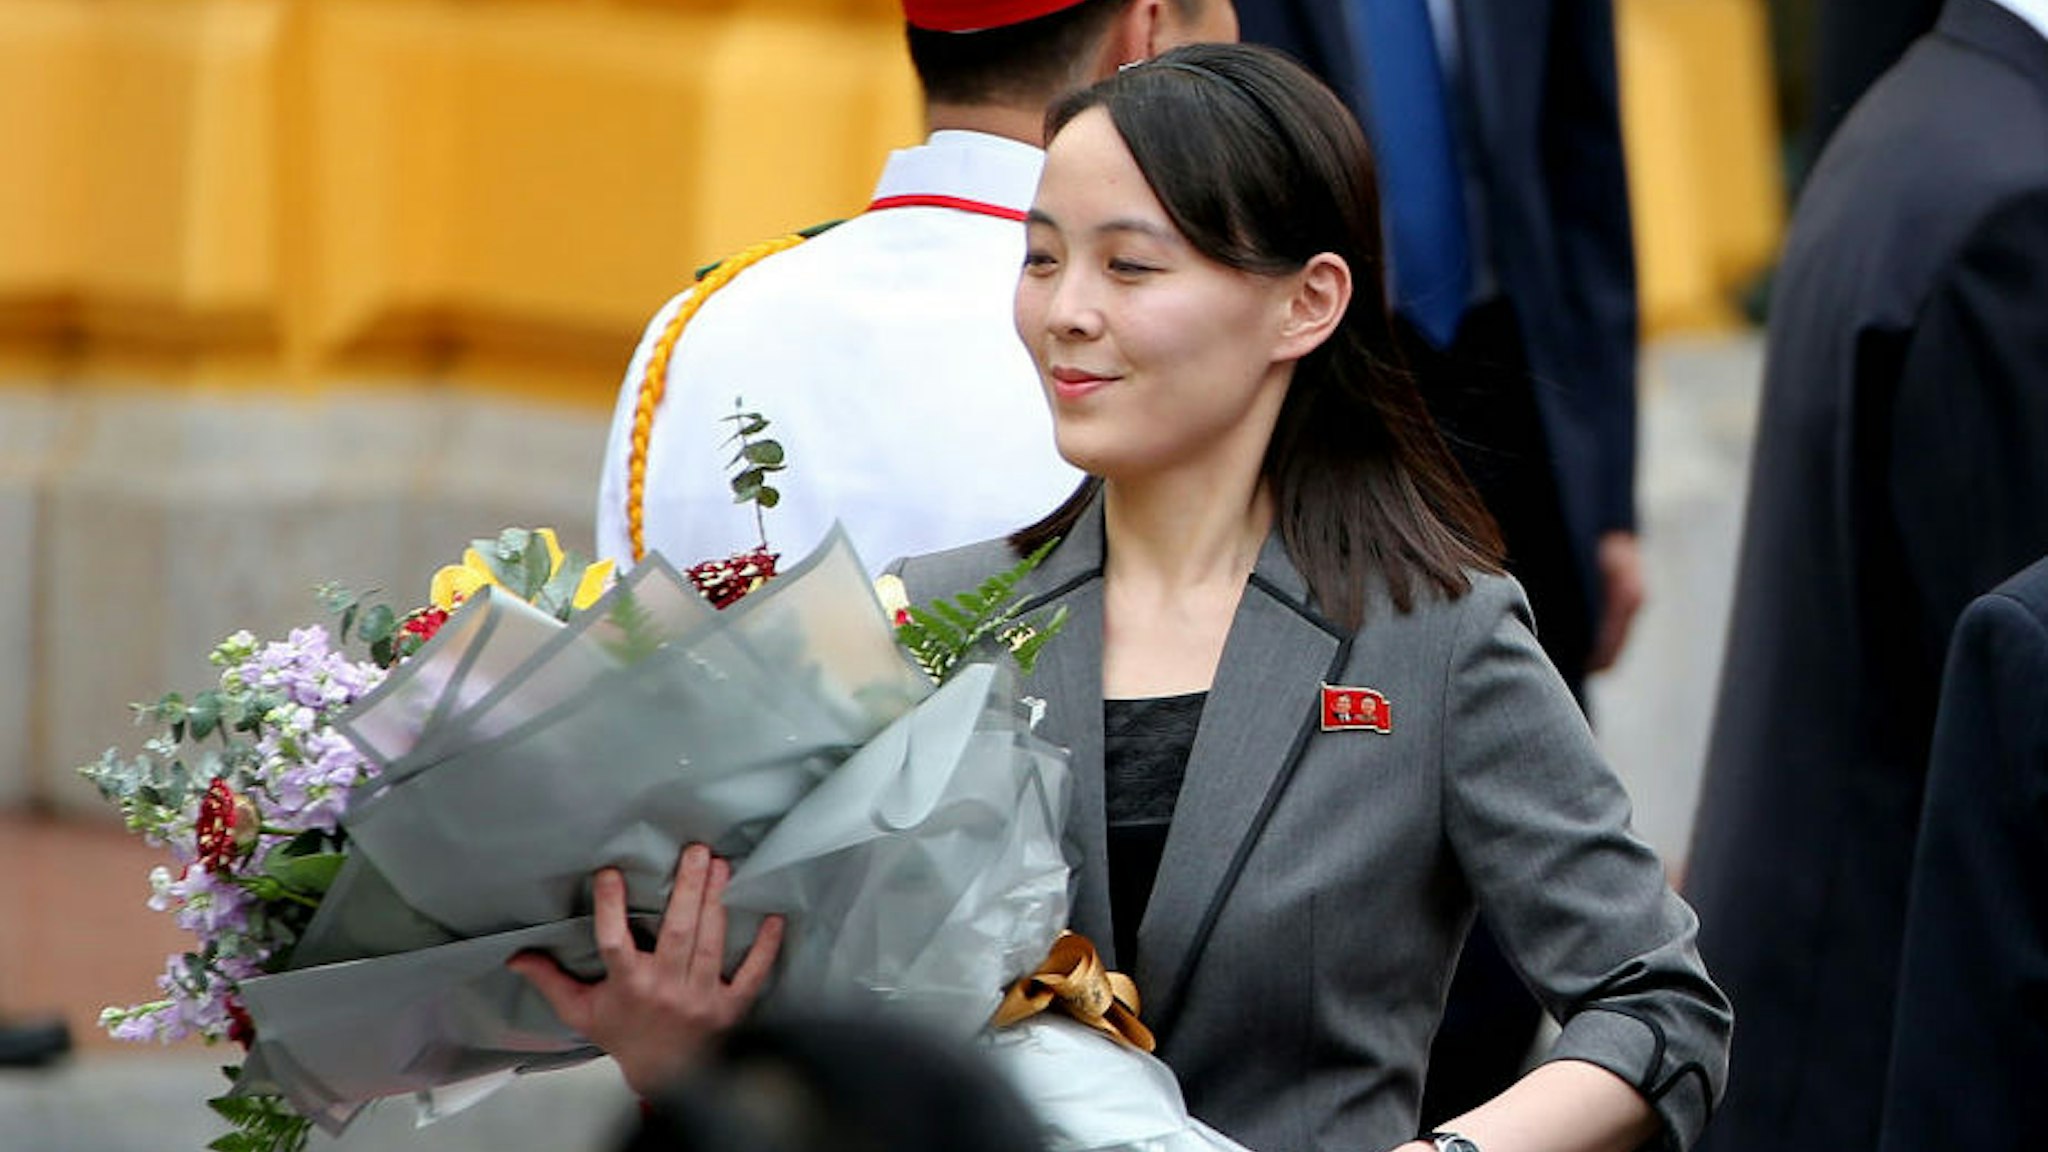 Kim Yo Jong, sister of North Korean leader Kim Jong Un, holds a flower bouquet during a welcoming ceremony at the Presidential Palace in Hanoi, Vietnam, on Friday, March 1, 2019. Kim will have a long train ride home through China to think about what went wrong in his second summit with Donald Trump and how to keep it from reversing his gains of the past year. Photographer: Luong Thai Linh/Pool via Bloomberg